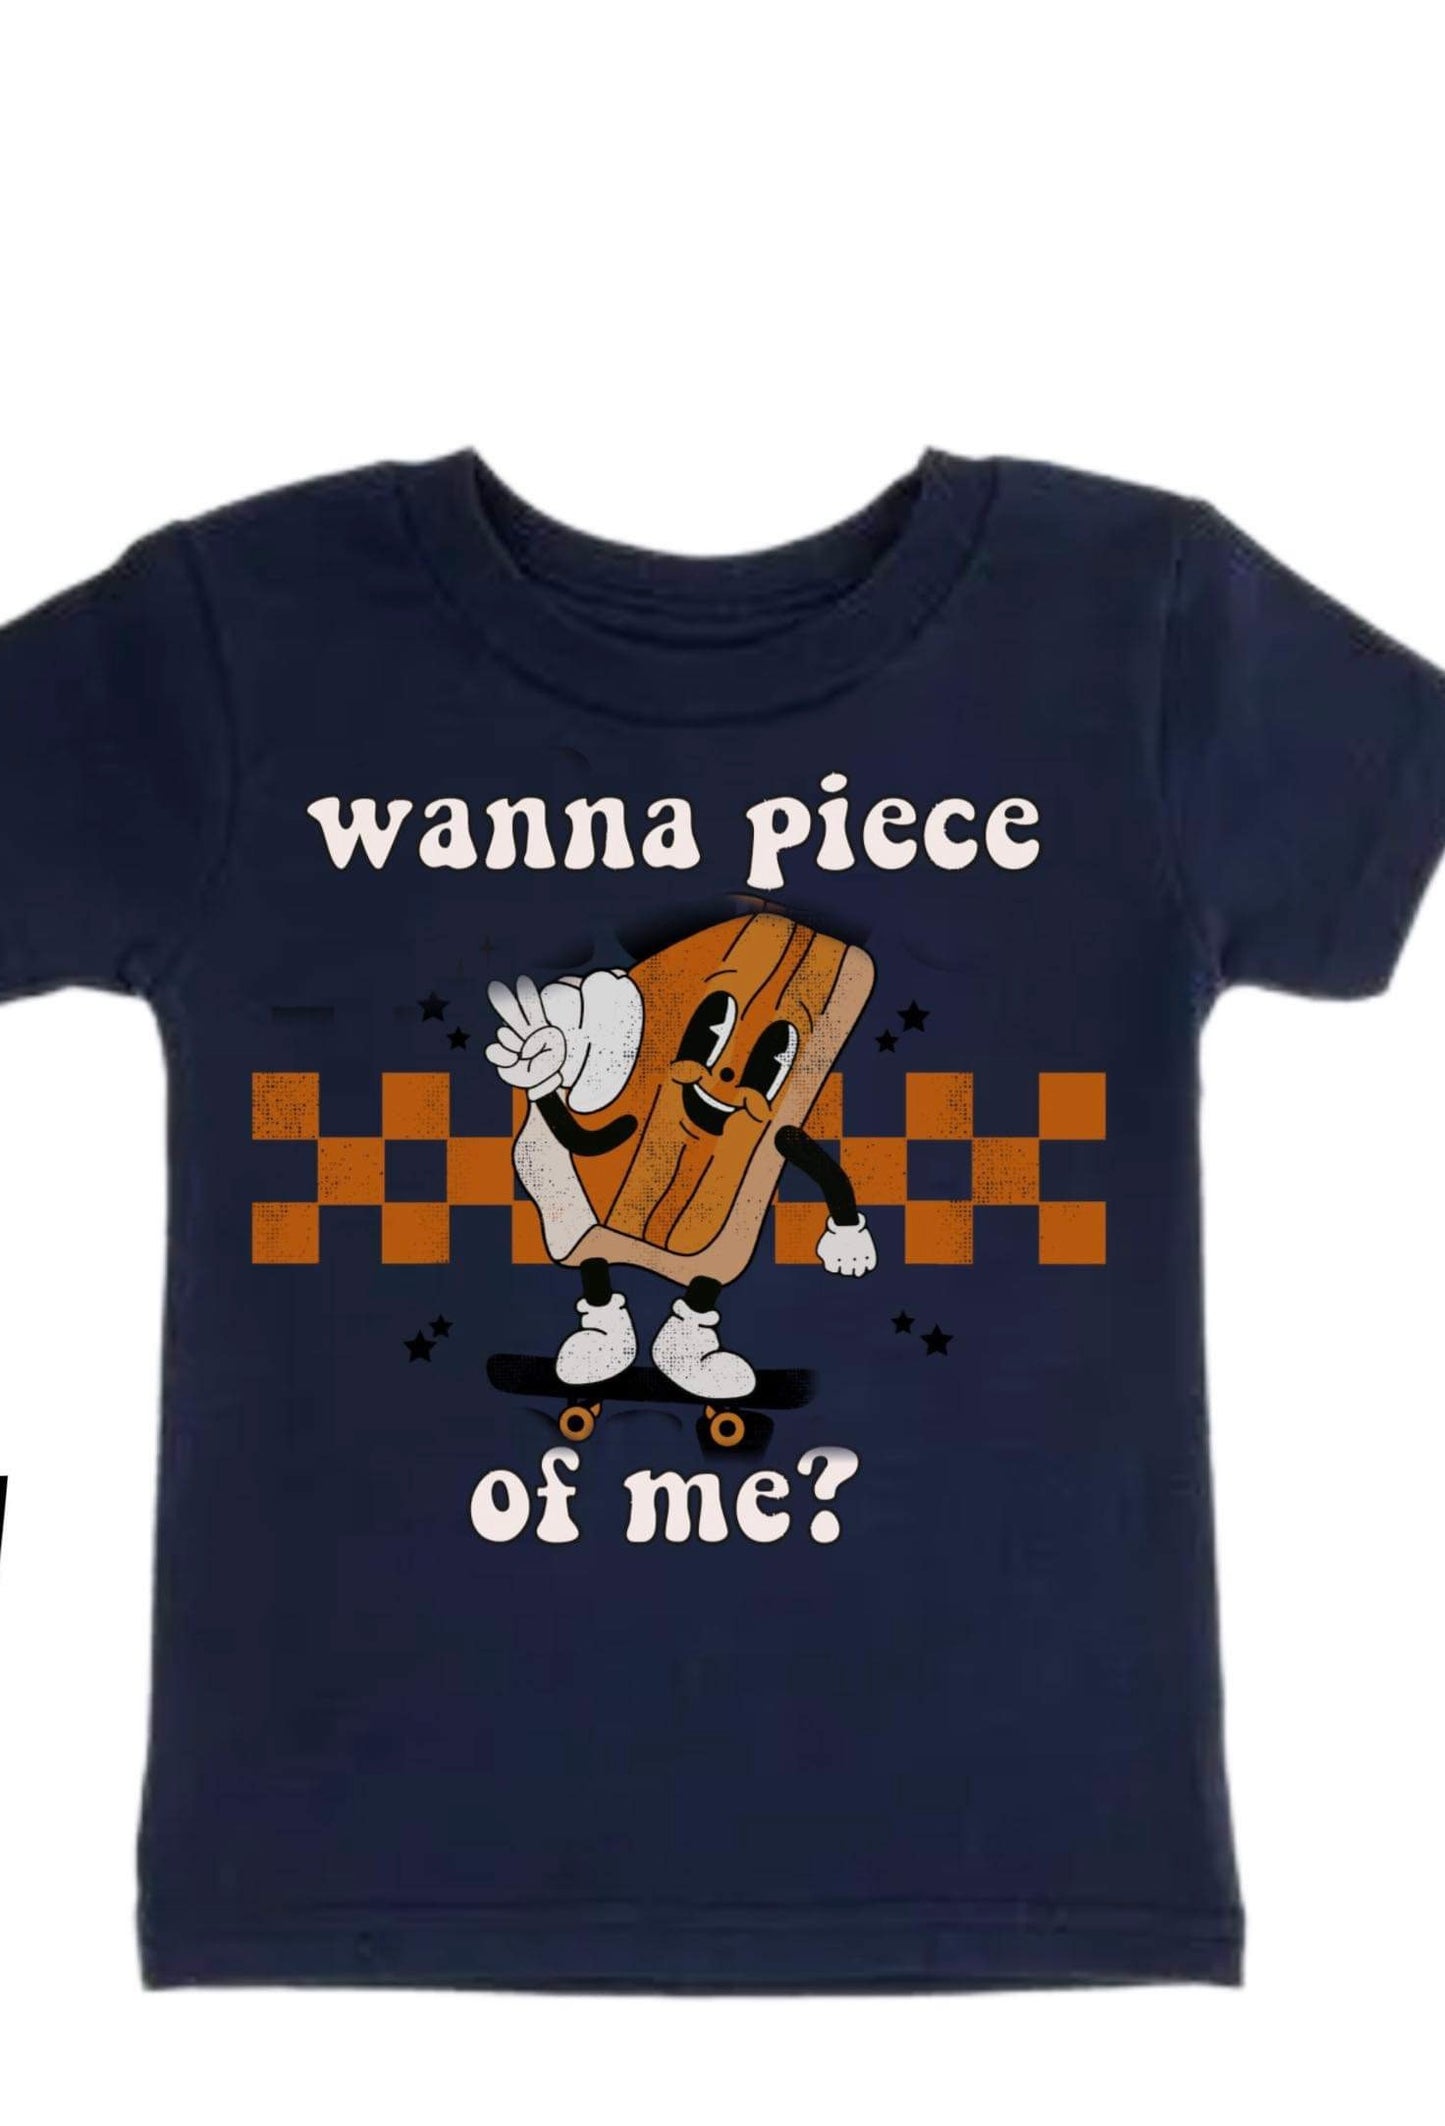 Wanna piece of me(shirt only)